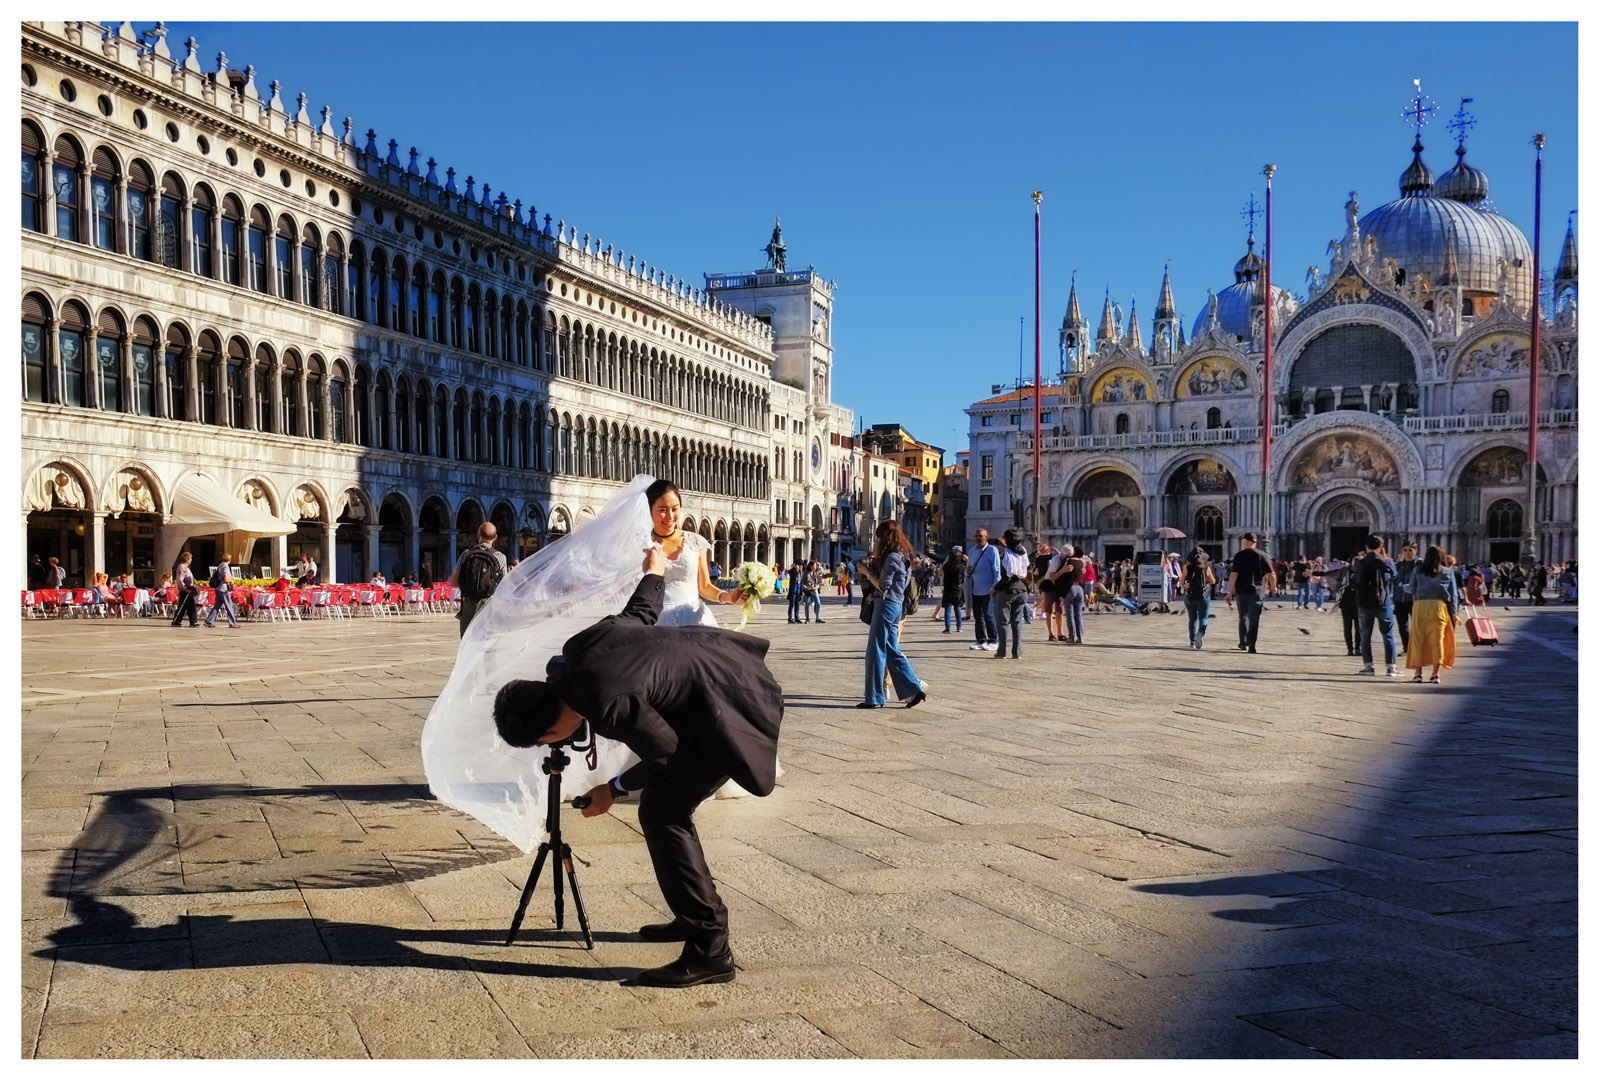 A DIY bride and groom photoshoot in Piazza San Marco with the Basilica San Marco in the backround. Street style travel photography by Kent Johnson.